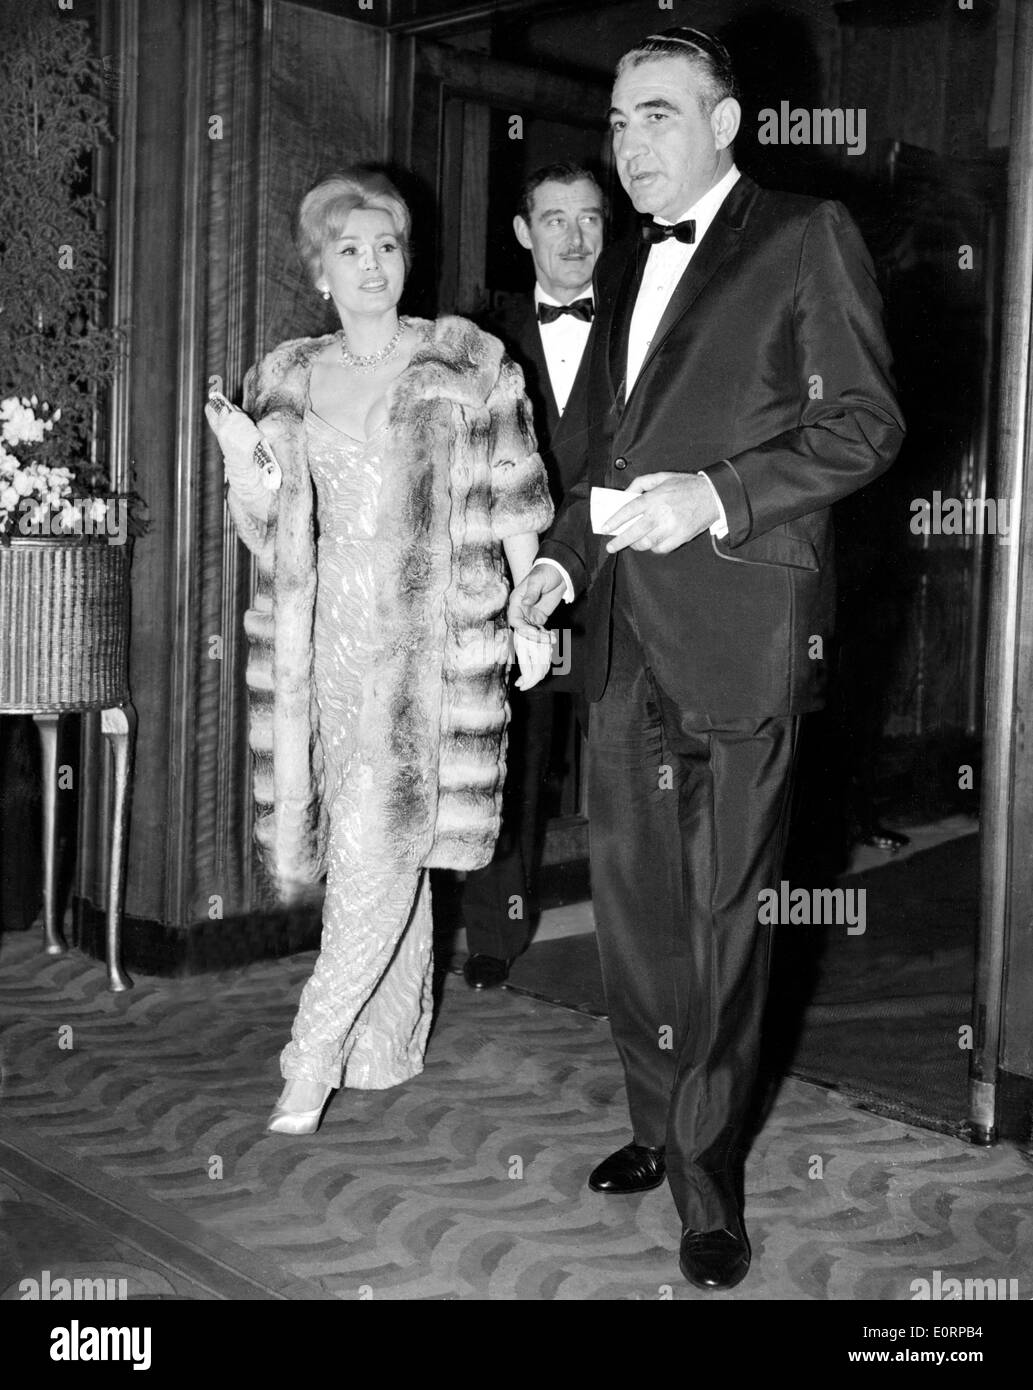 Zsa Zsa Gabor At The Opening Night Of Sink The Bismarck At